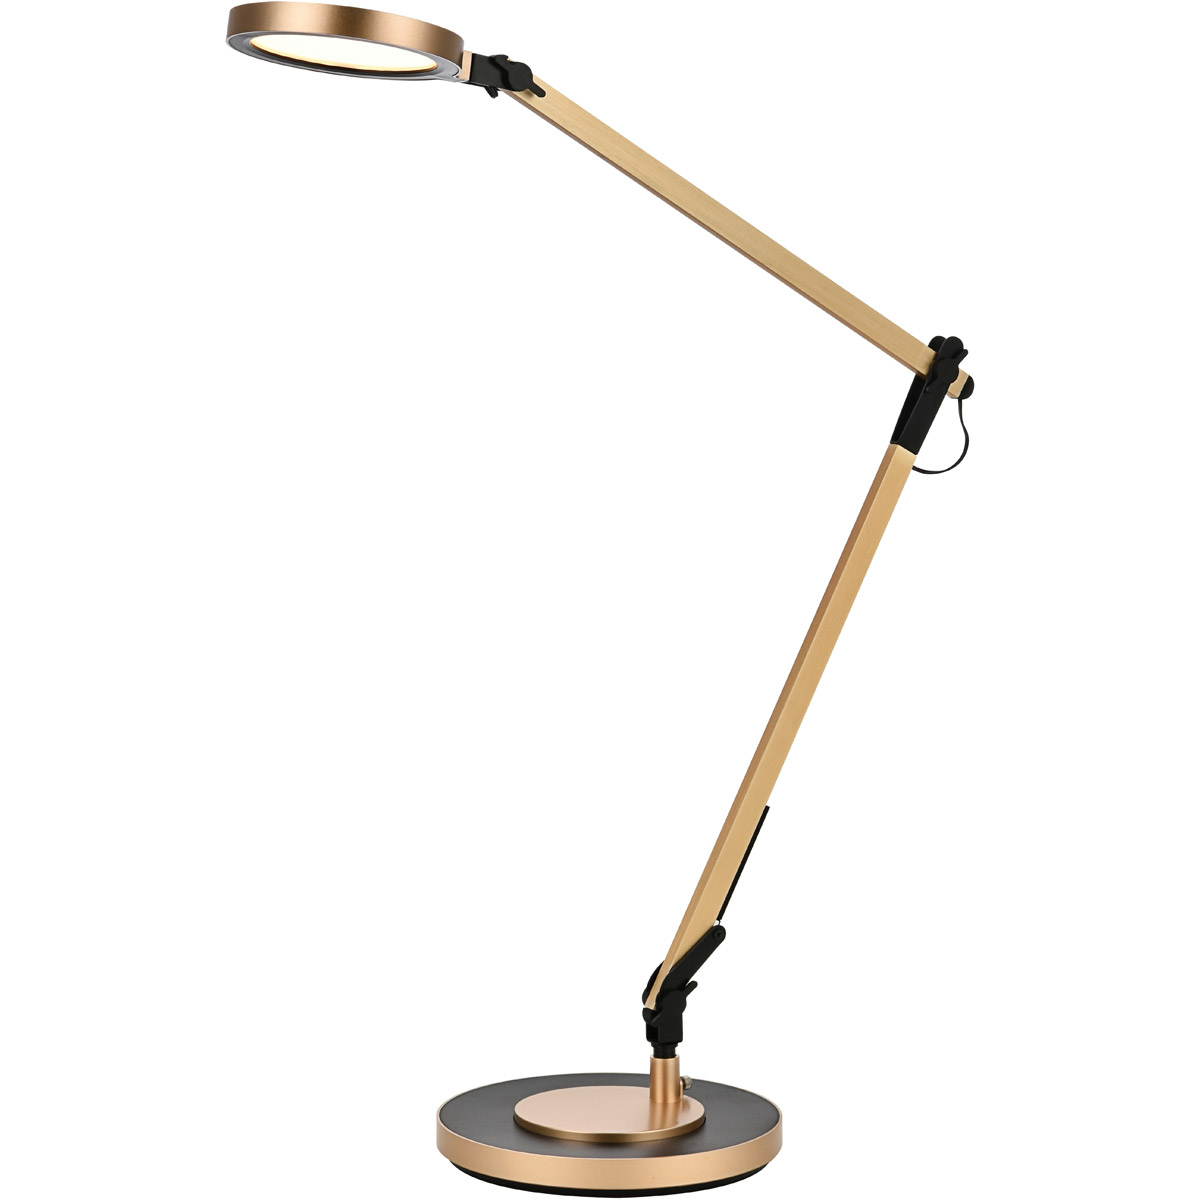 Ledds006 Sleek Led Desk Lamp With Smooth Touch Dimmer & Usb, Champagne Gold